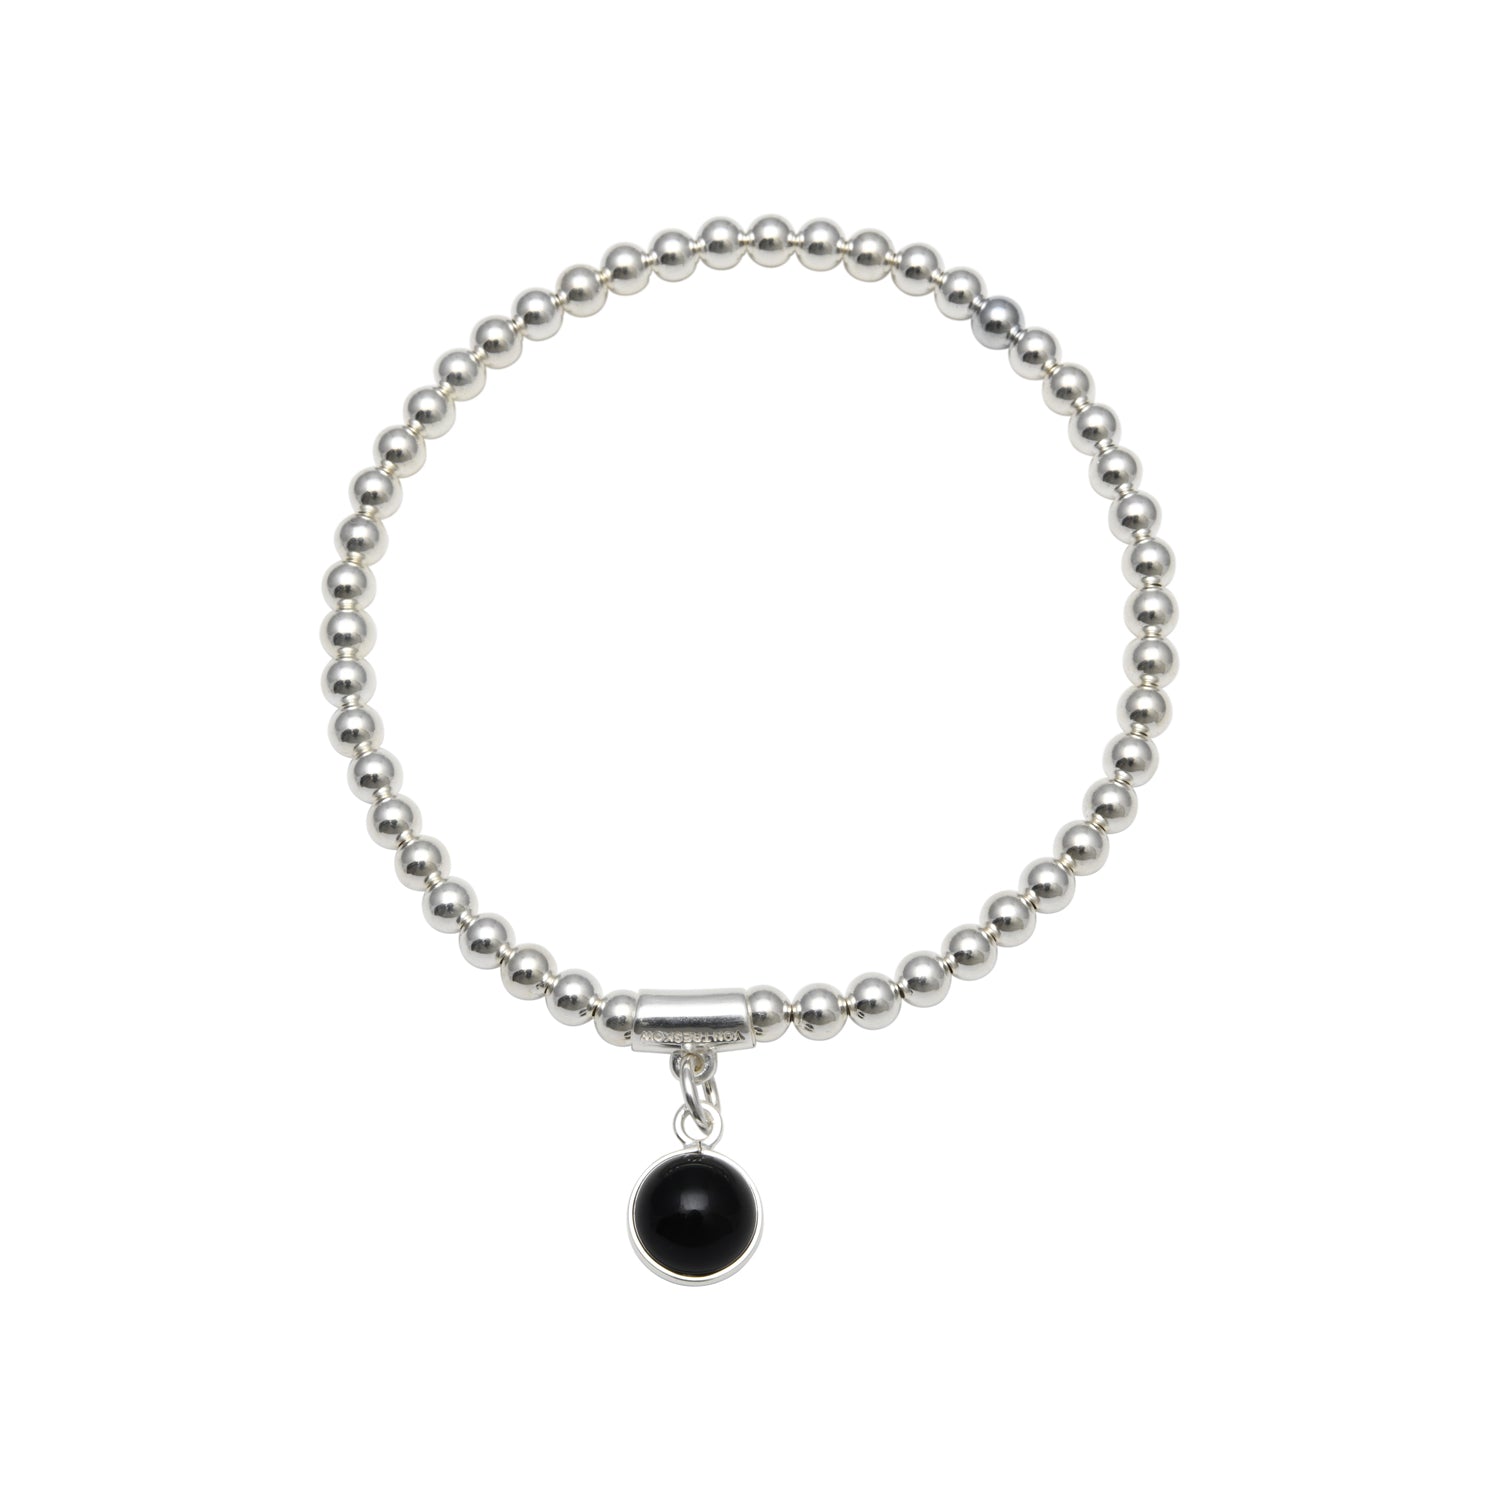 Sterling Silver 4mm Stretchy Ball Bracelet With 8mm Round Black Onyx Bead Charm.